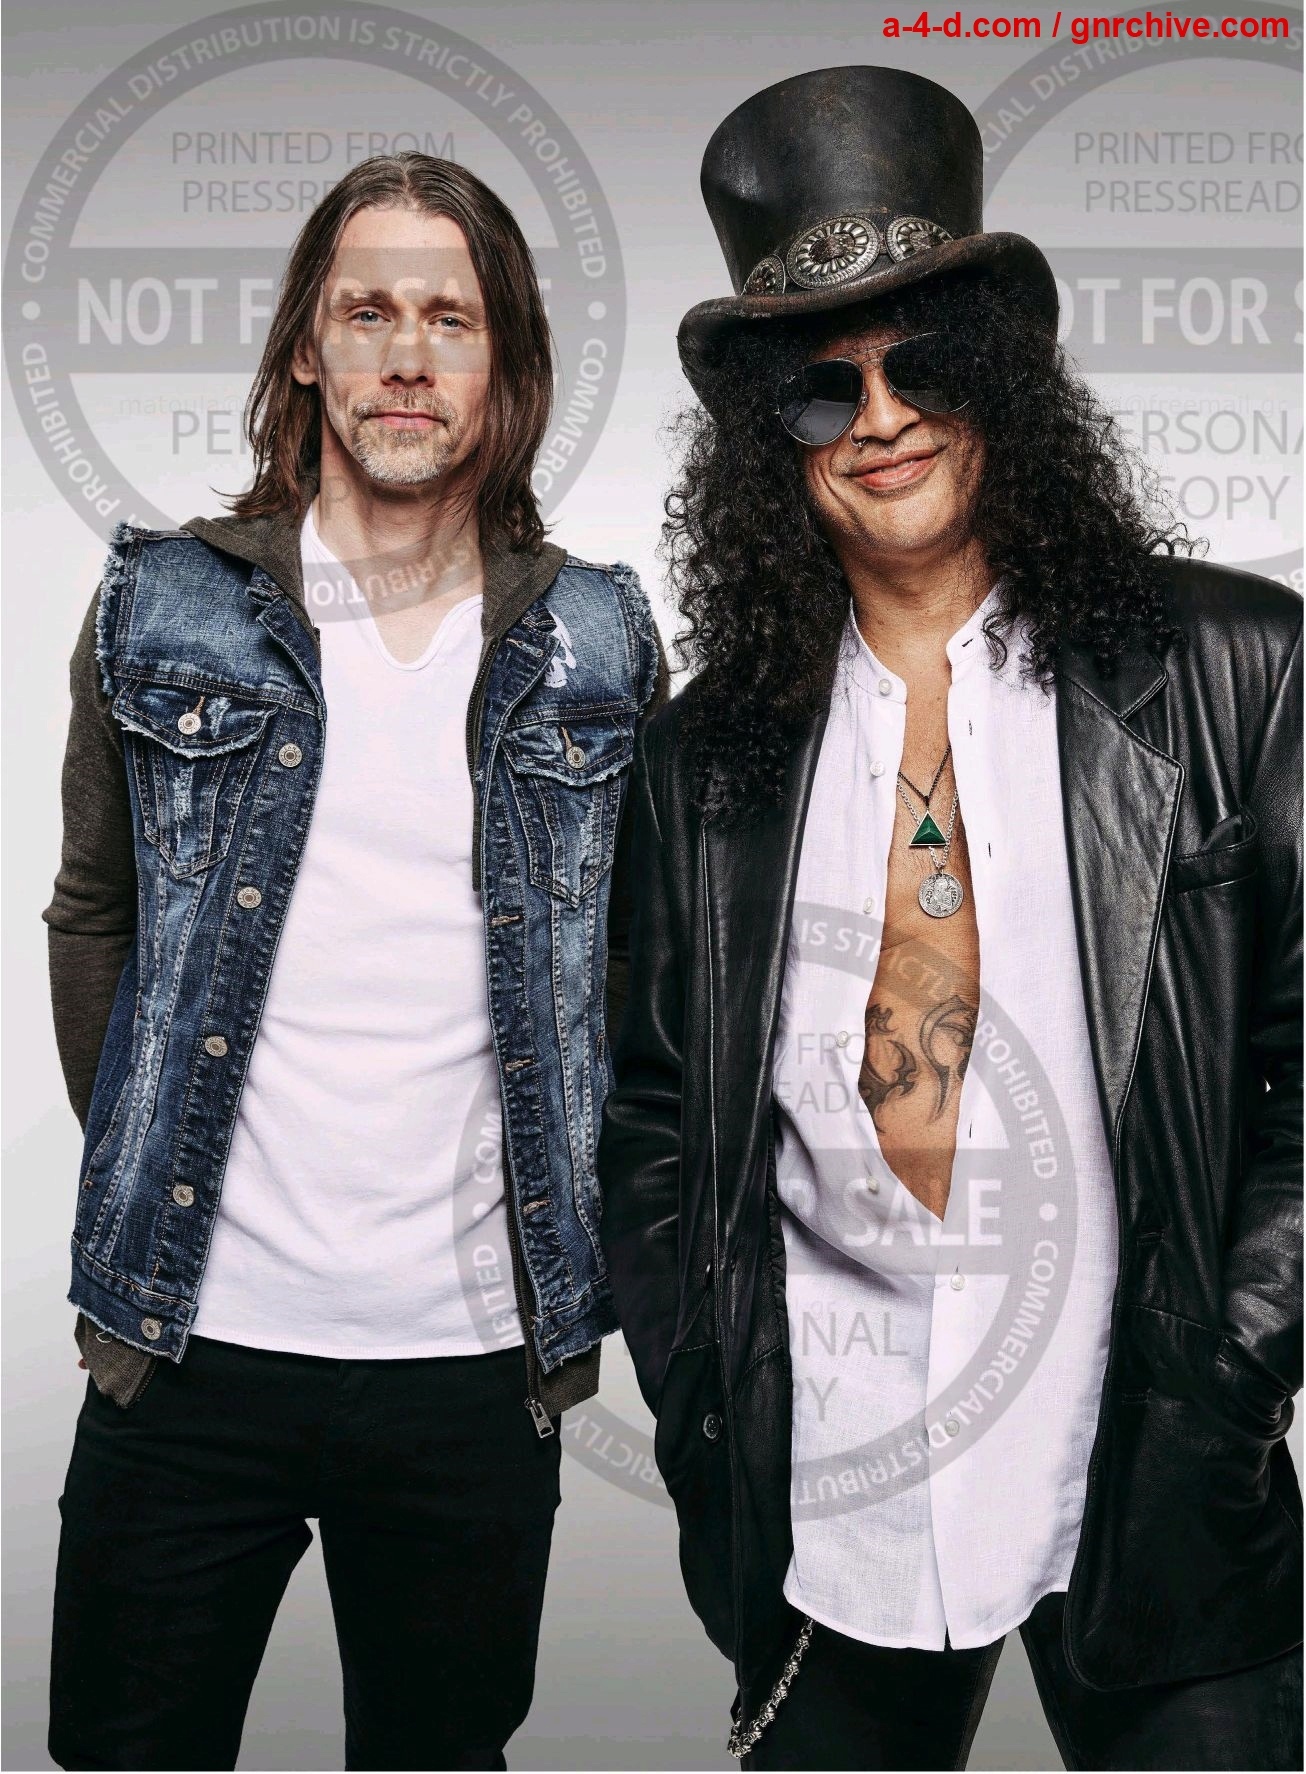 2022.01.DD - Classic Rock - Interview with Slash 2022_020